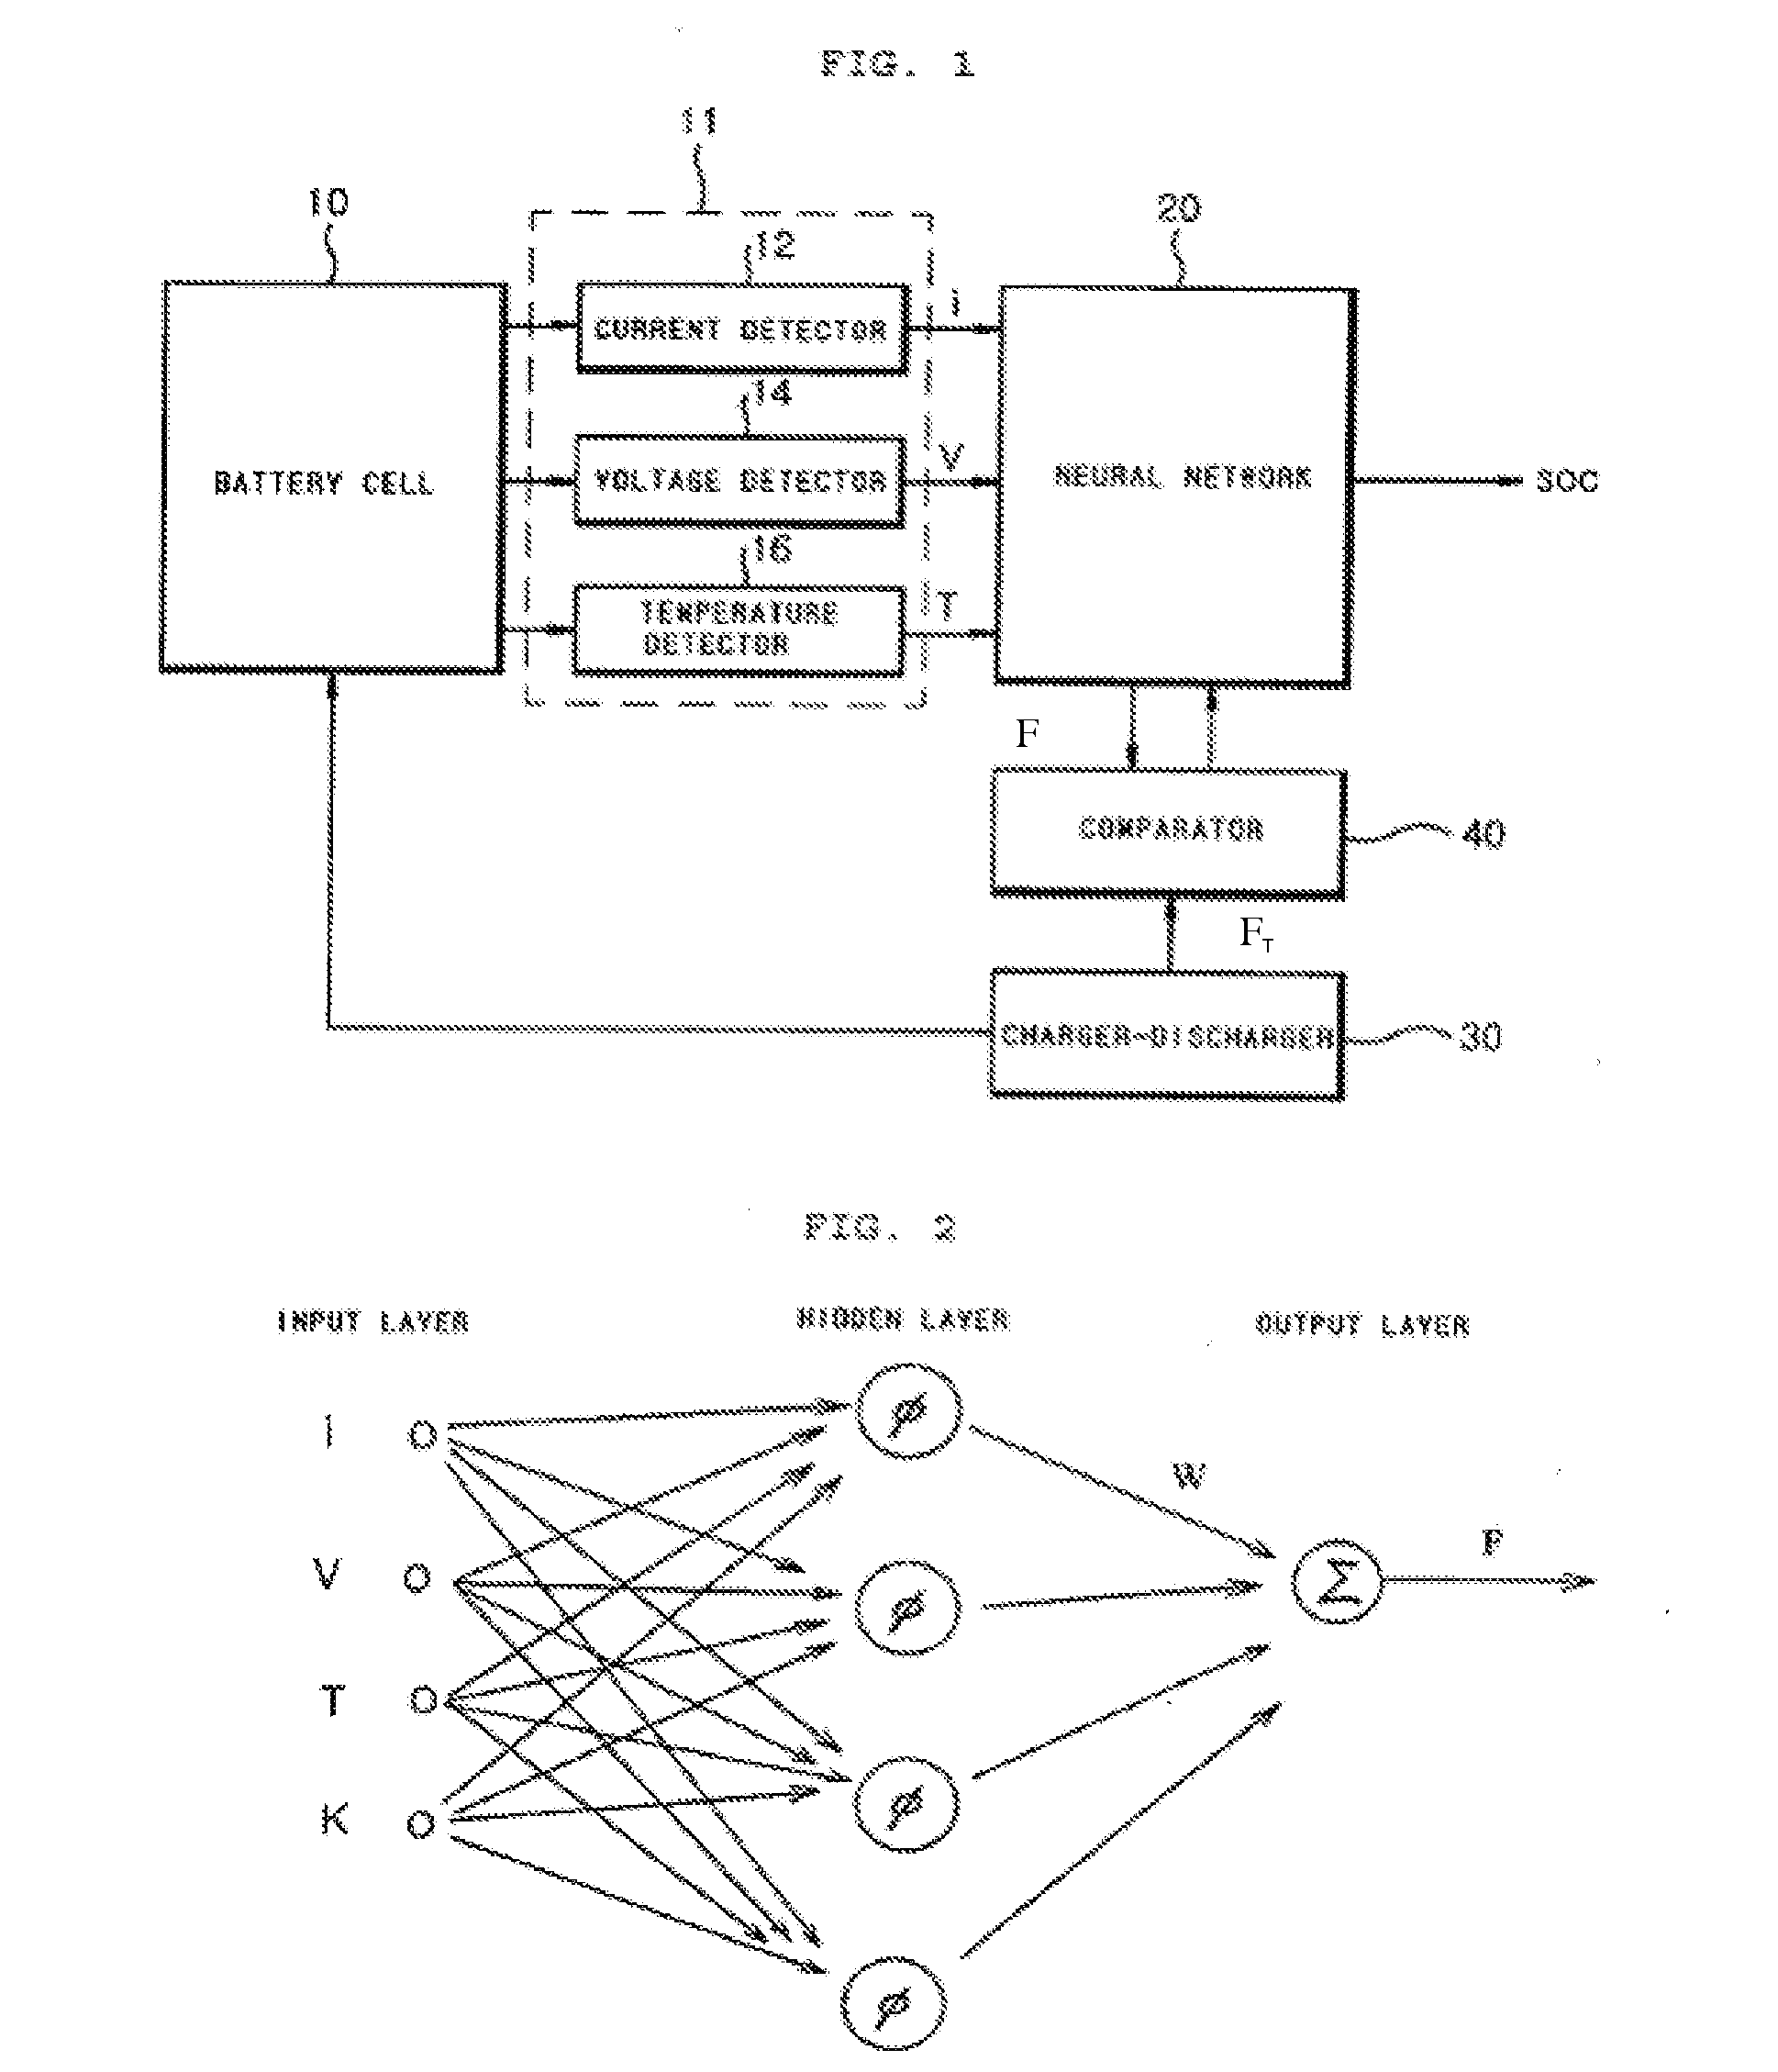 Apparatus and method for testing state of charge in battery